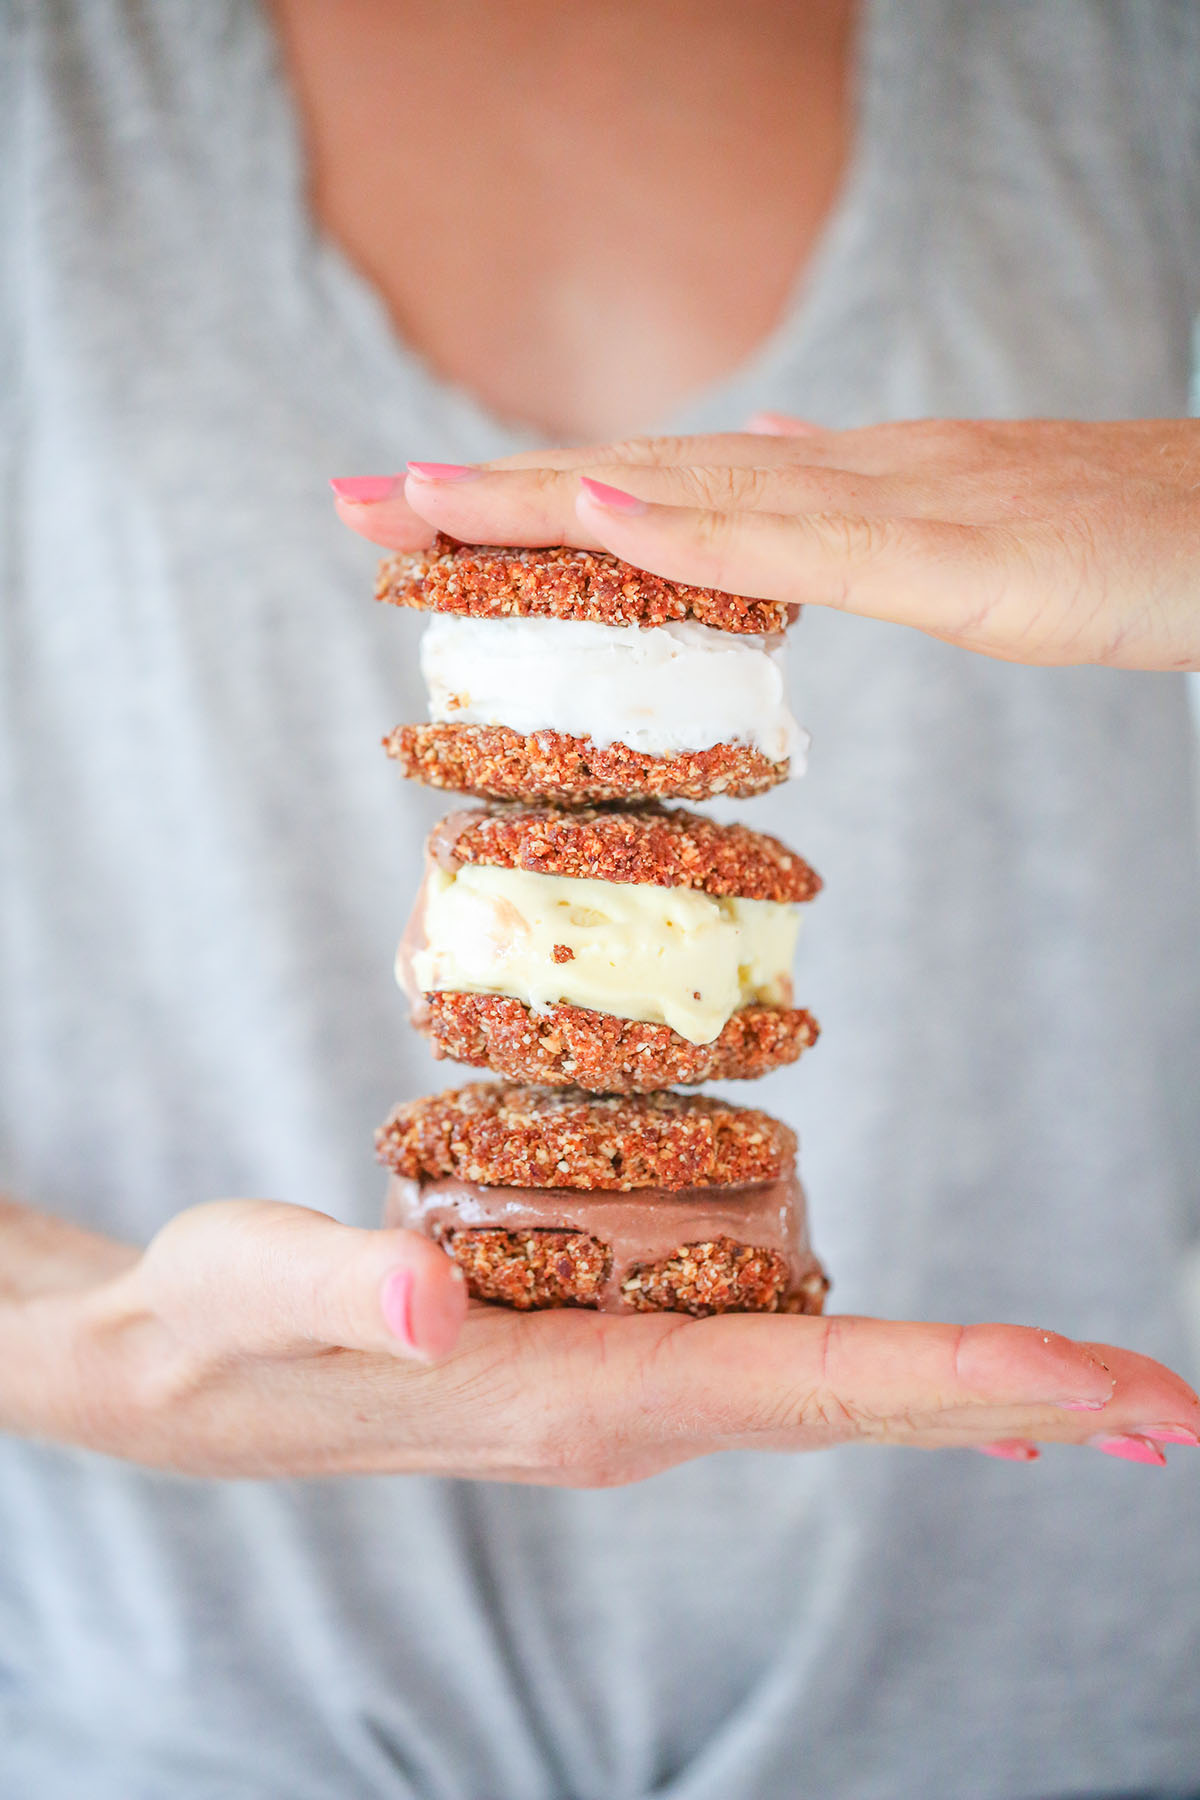 Hands up if you love a good ice cream sammy?! Now you can make your own with just 4 ingredients, no dairy/egg in sight. Vegan, dairy free, egg free, lactose free, made with coconut milk ice cream.